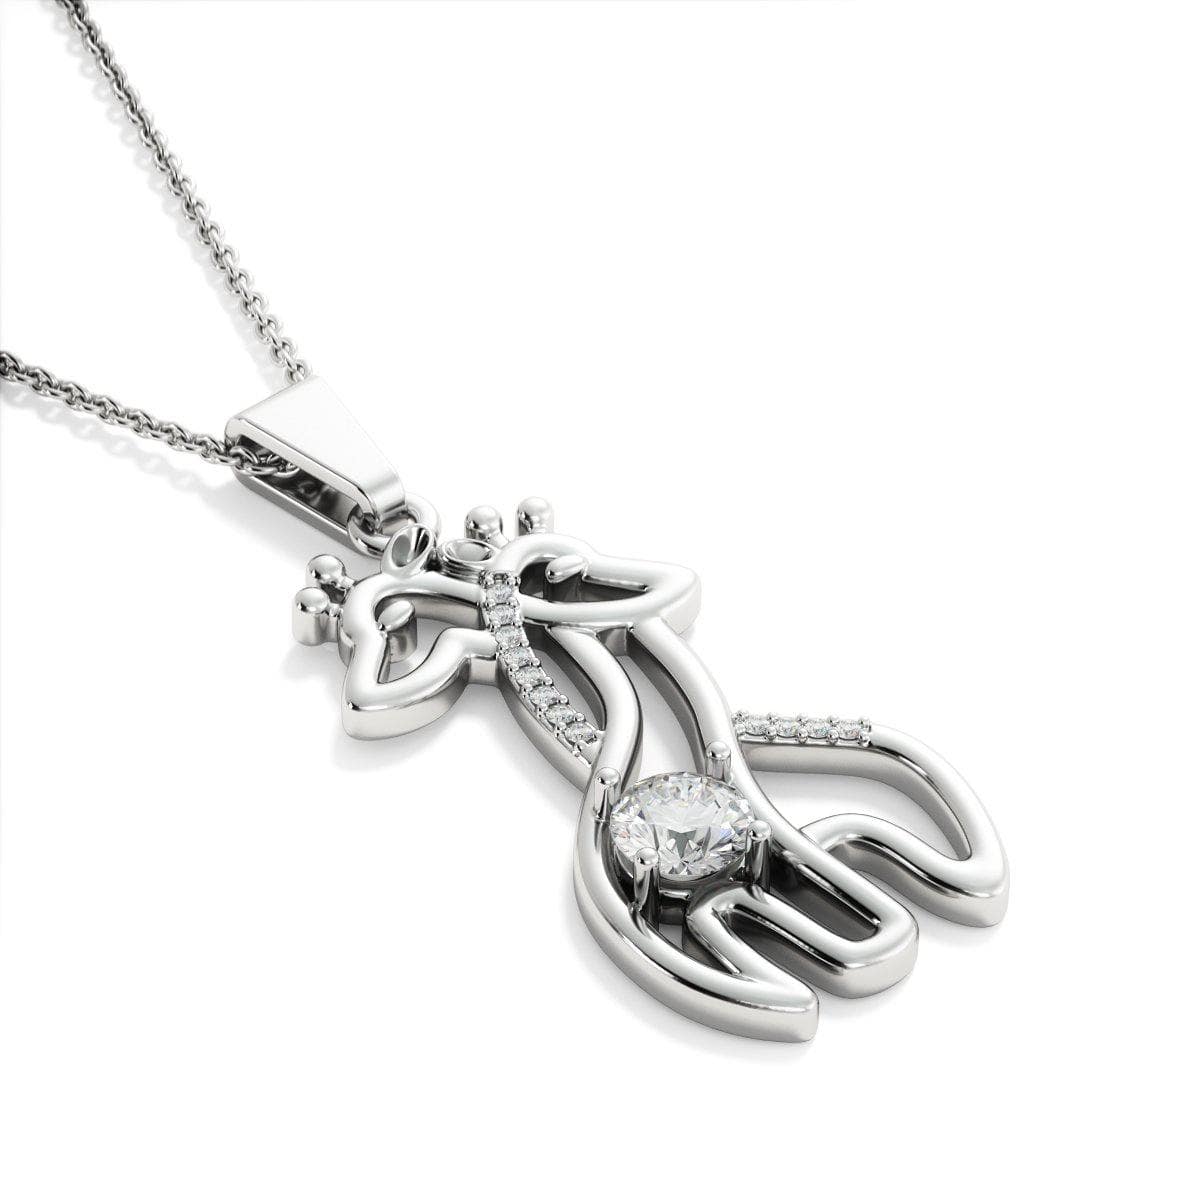 To My Granddaughter - I will always be there - Giraffe Necklace